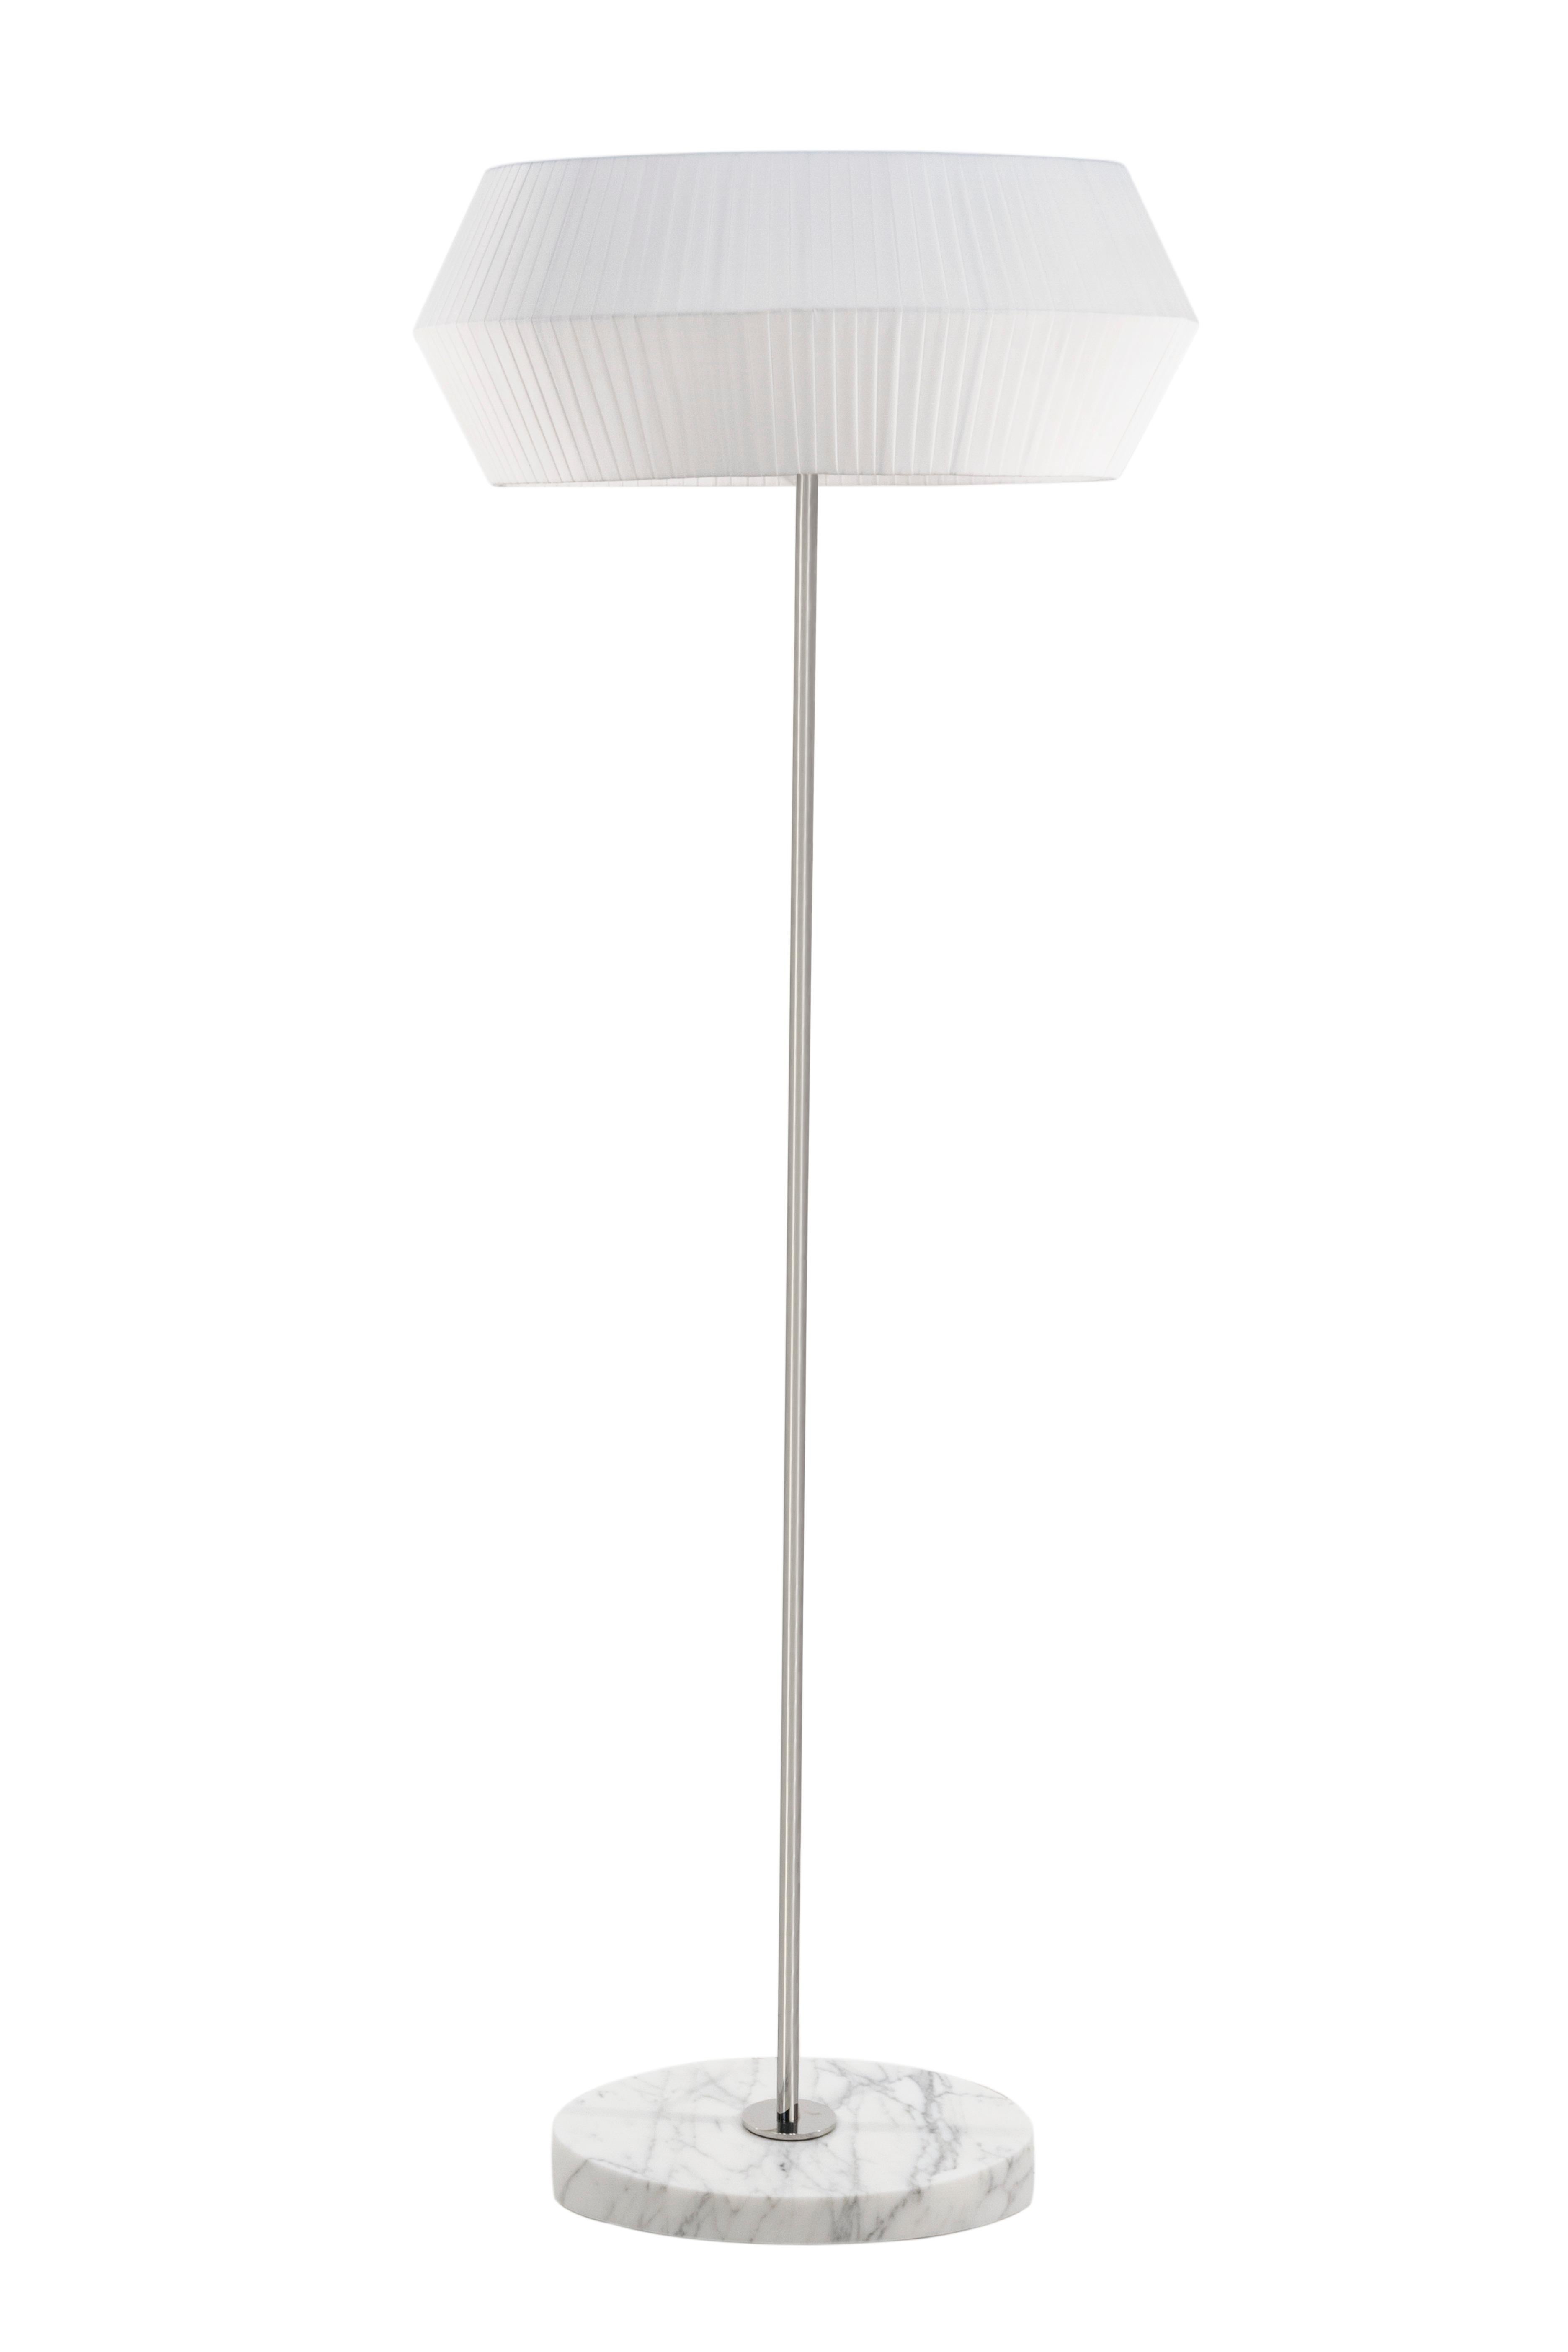 Contemporary Modern Sublime Floor Lamp, White Silk Marble, Handmade in Portugal by Greenapple For Sale